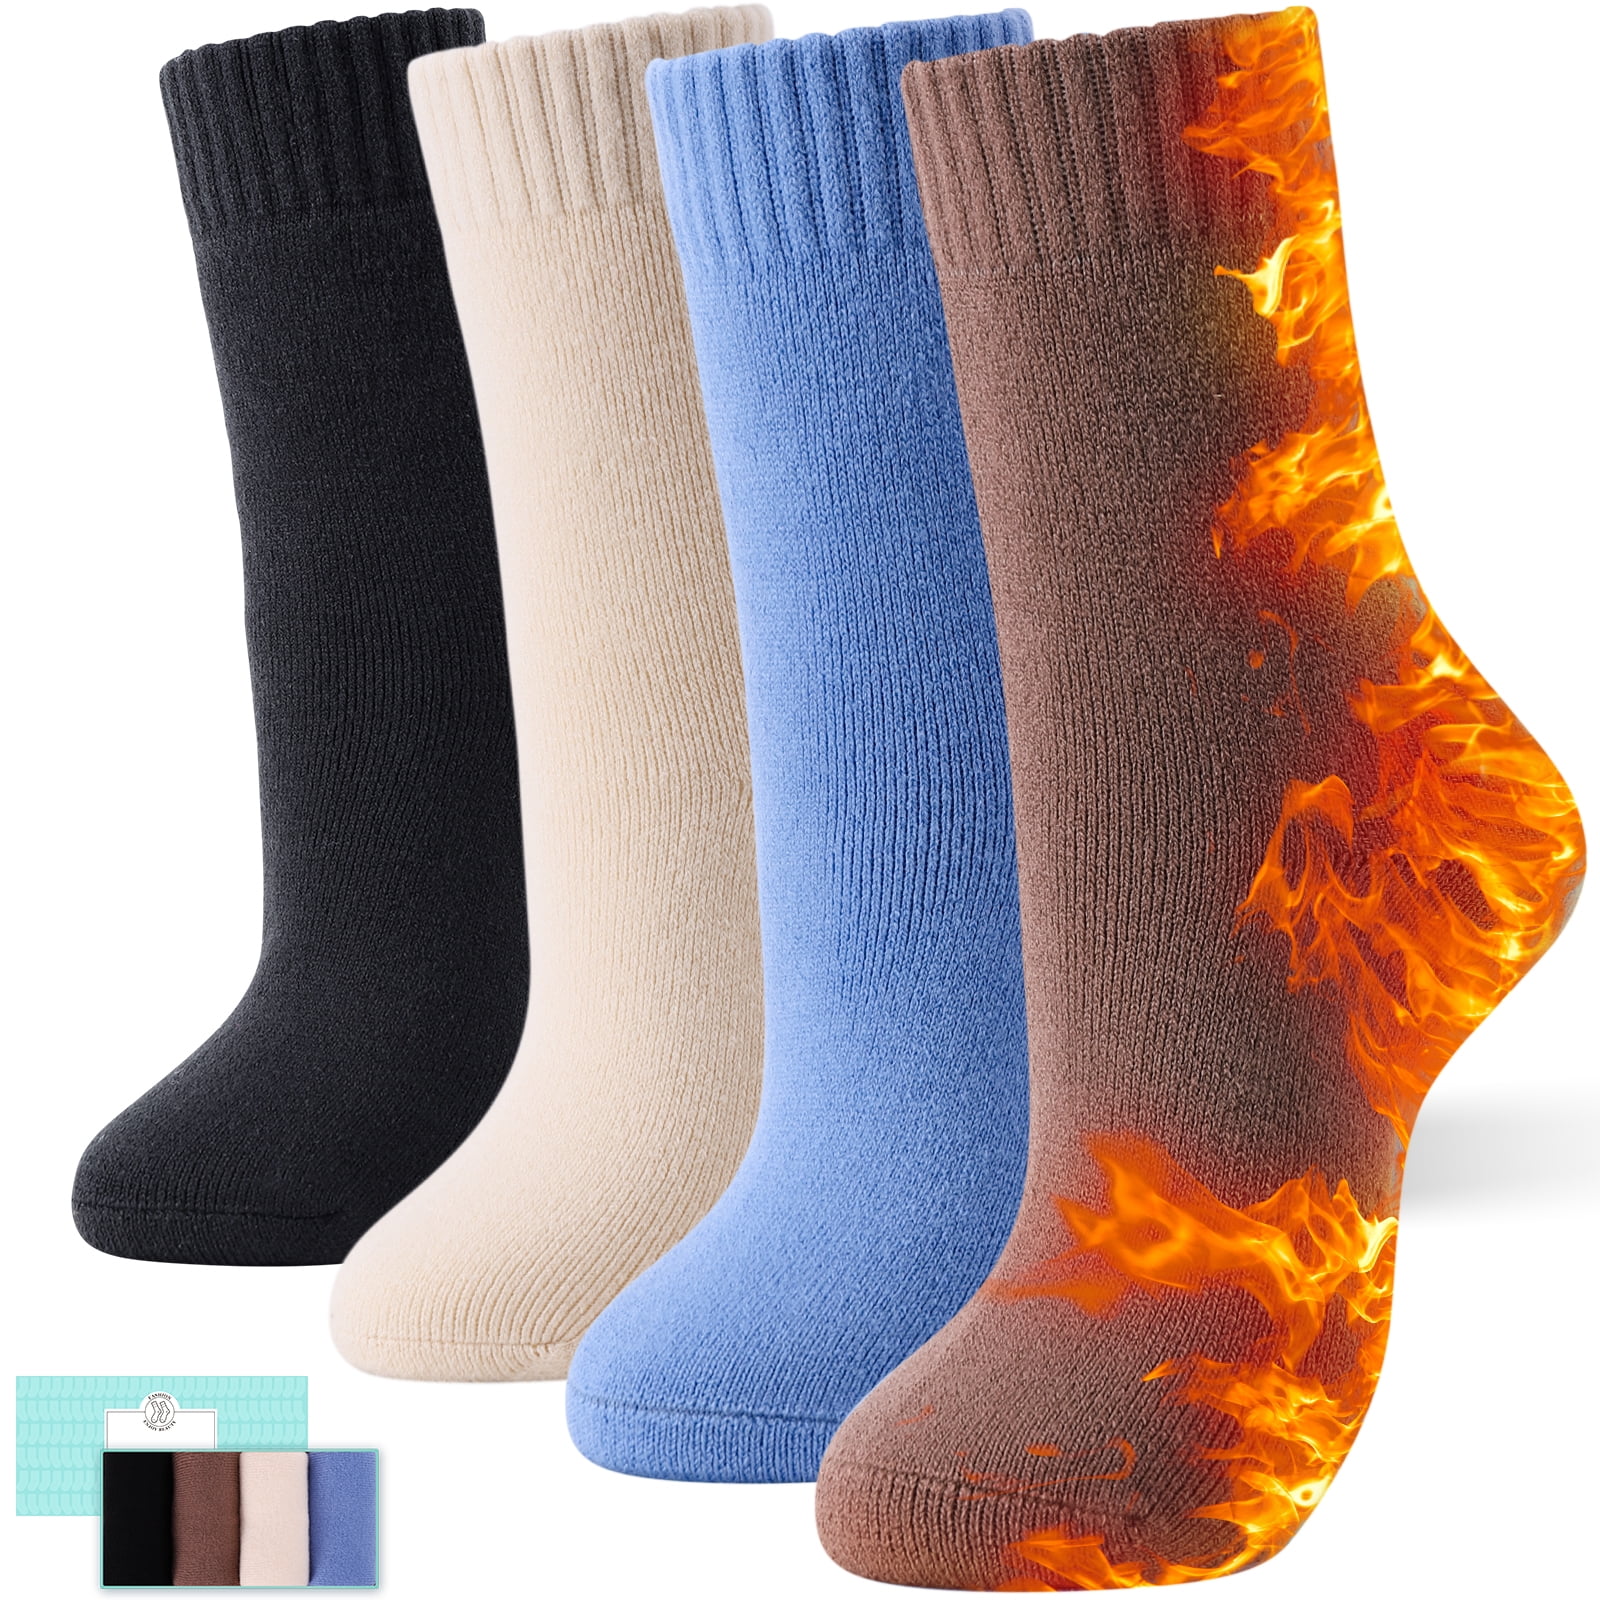 4 Pairs Thick Thermal Heated Socks for Women Extreme Cold Weather